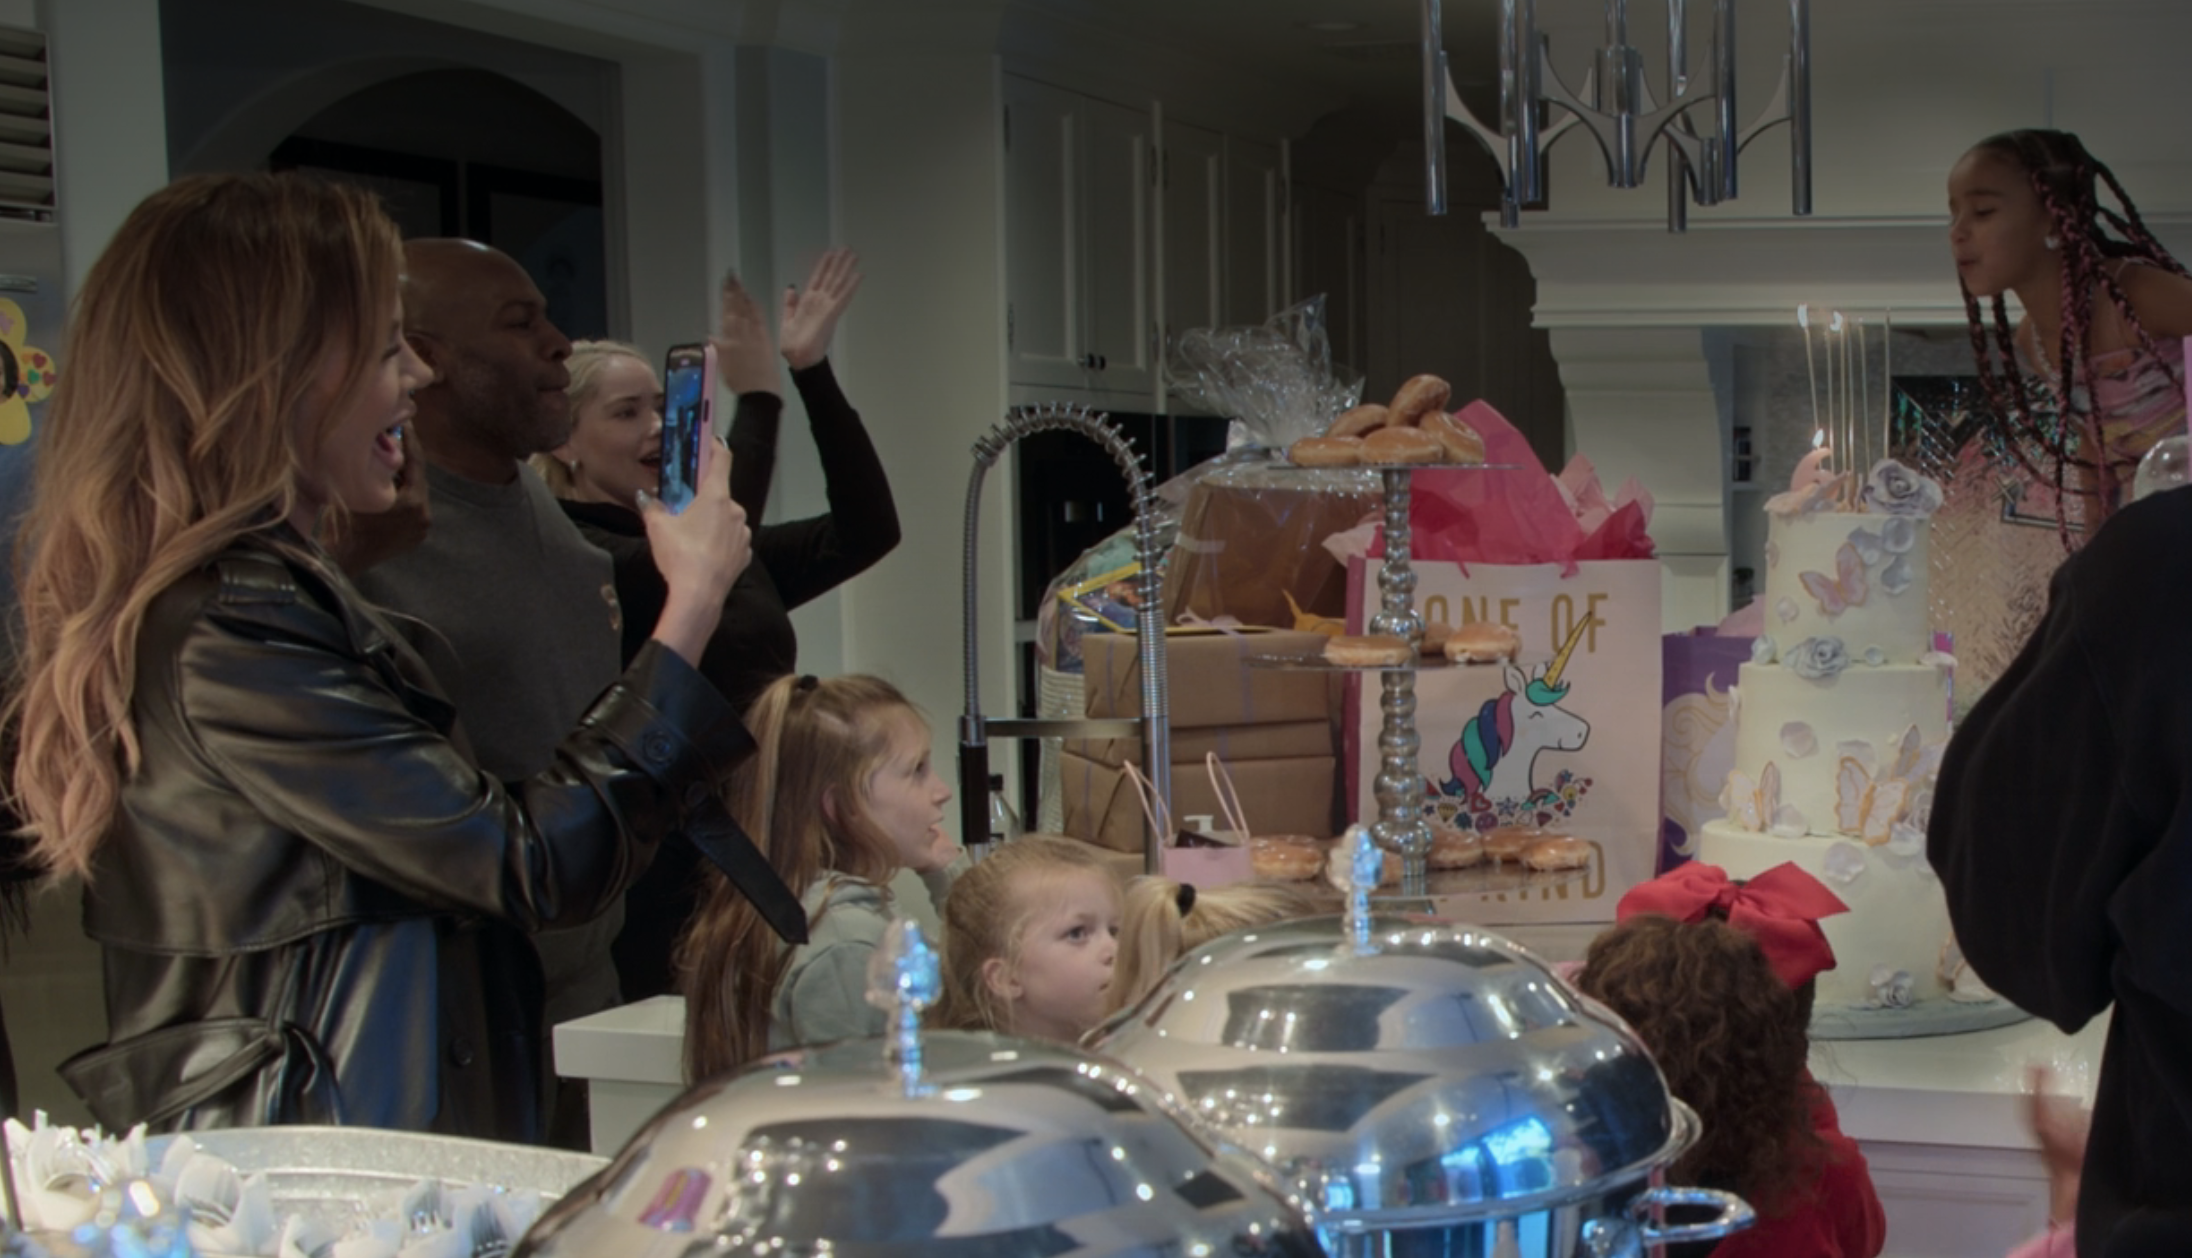 Khloé with other adults and children in a room with a cake and gifts